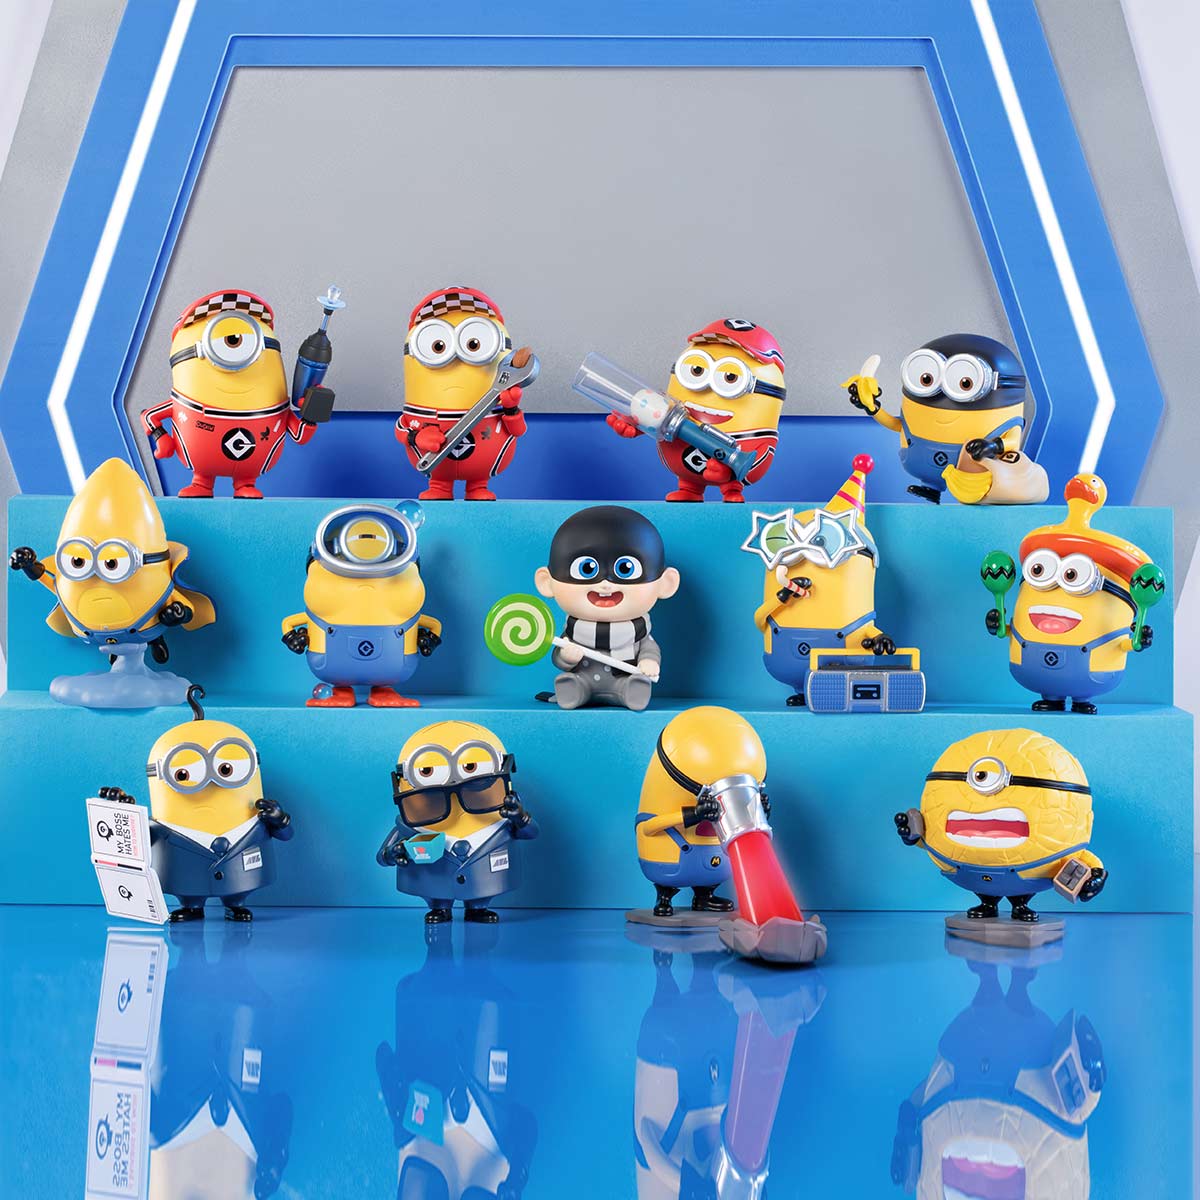 Universal Despicable Me 4 Blind Box Series - Preorder